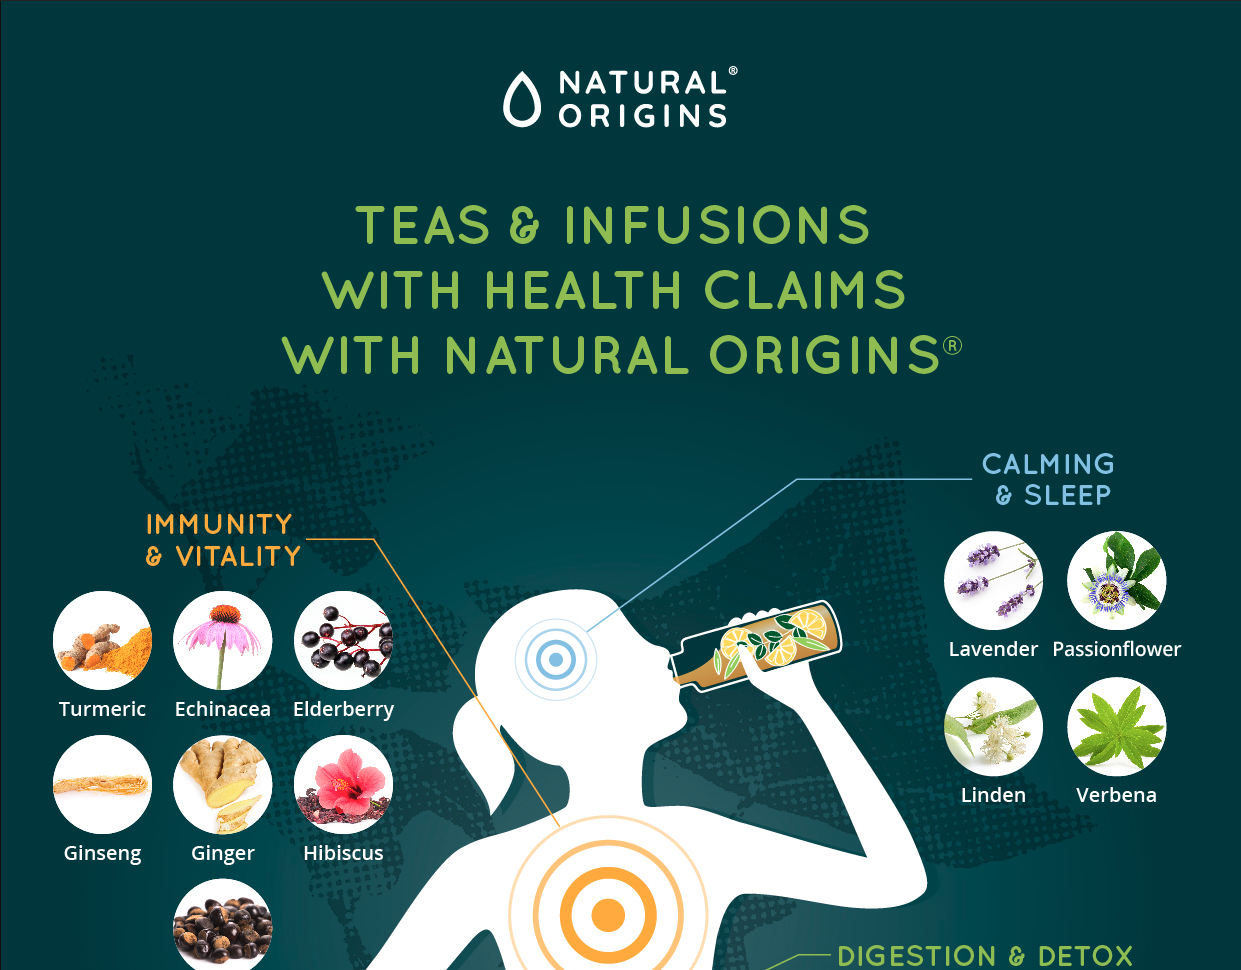 teas & infusions with health claims with natural origins